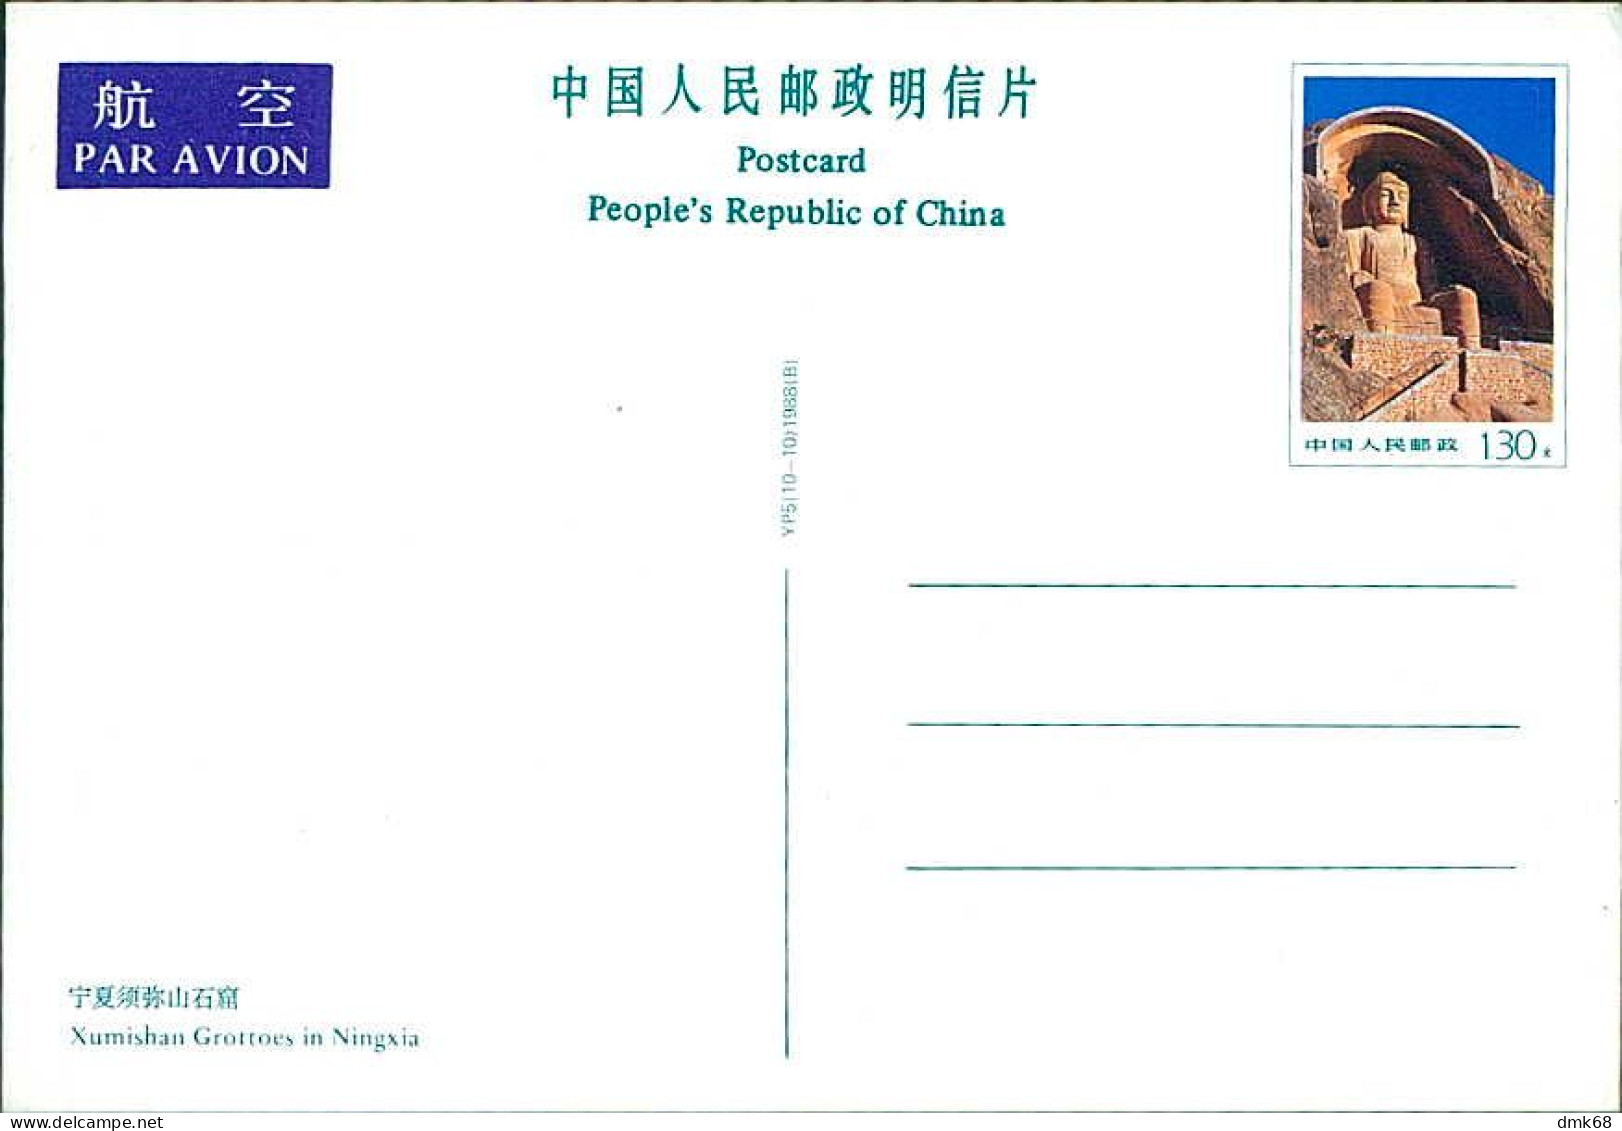 CHINA - 10 INTERNATIONAL AIRMAIL PRE-STAMPED POSTCARDS + FOLDER - YEAR 1988 (18373)